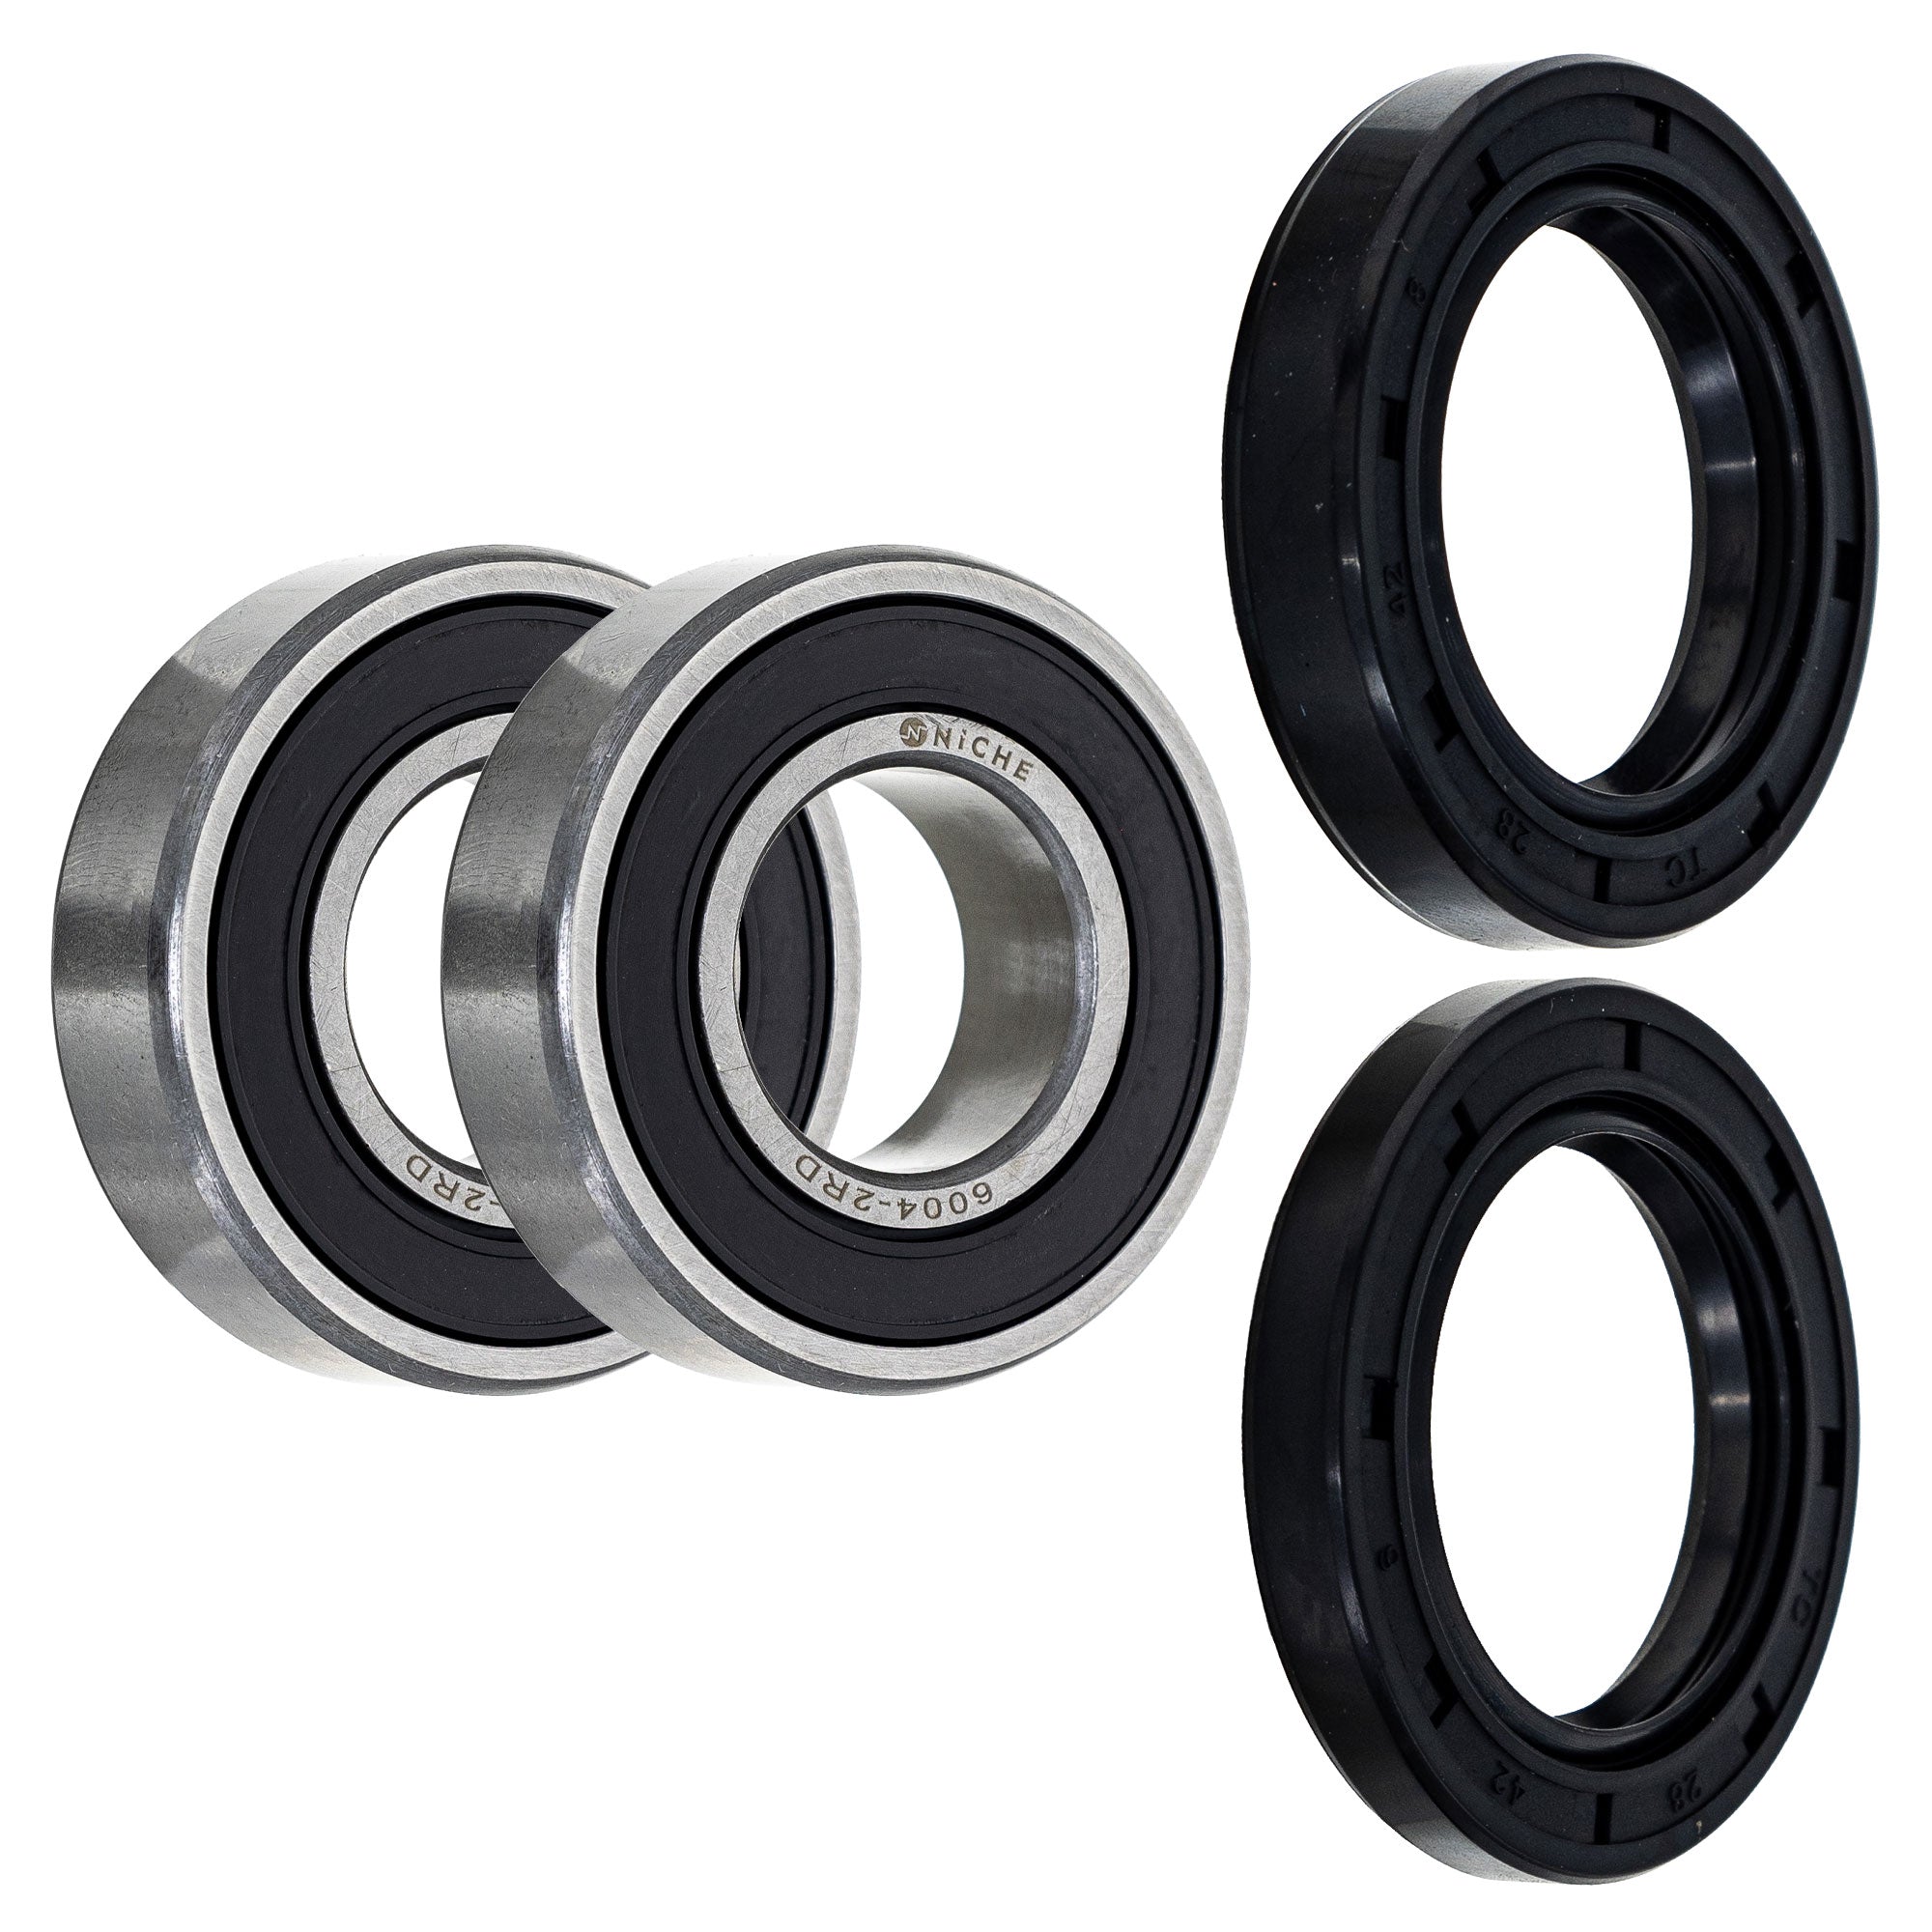 Wheel Bearing Seal Kit for zOTHER TRX200 FourTrax NICHE MK1008980